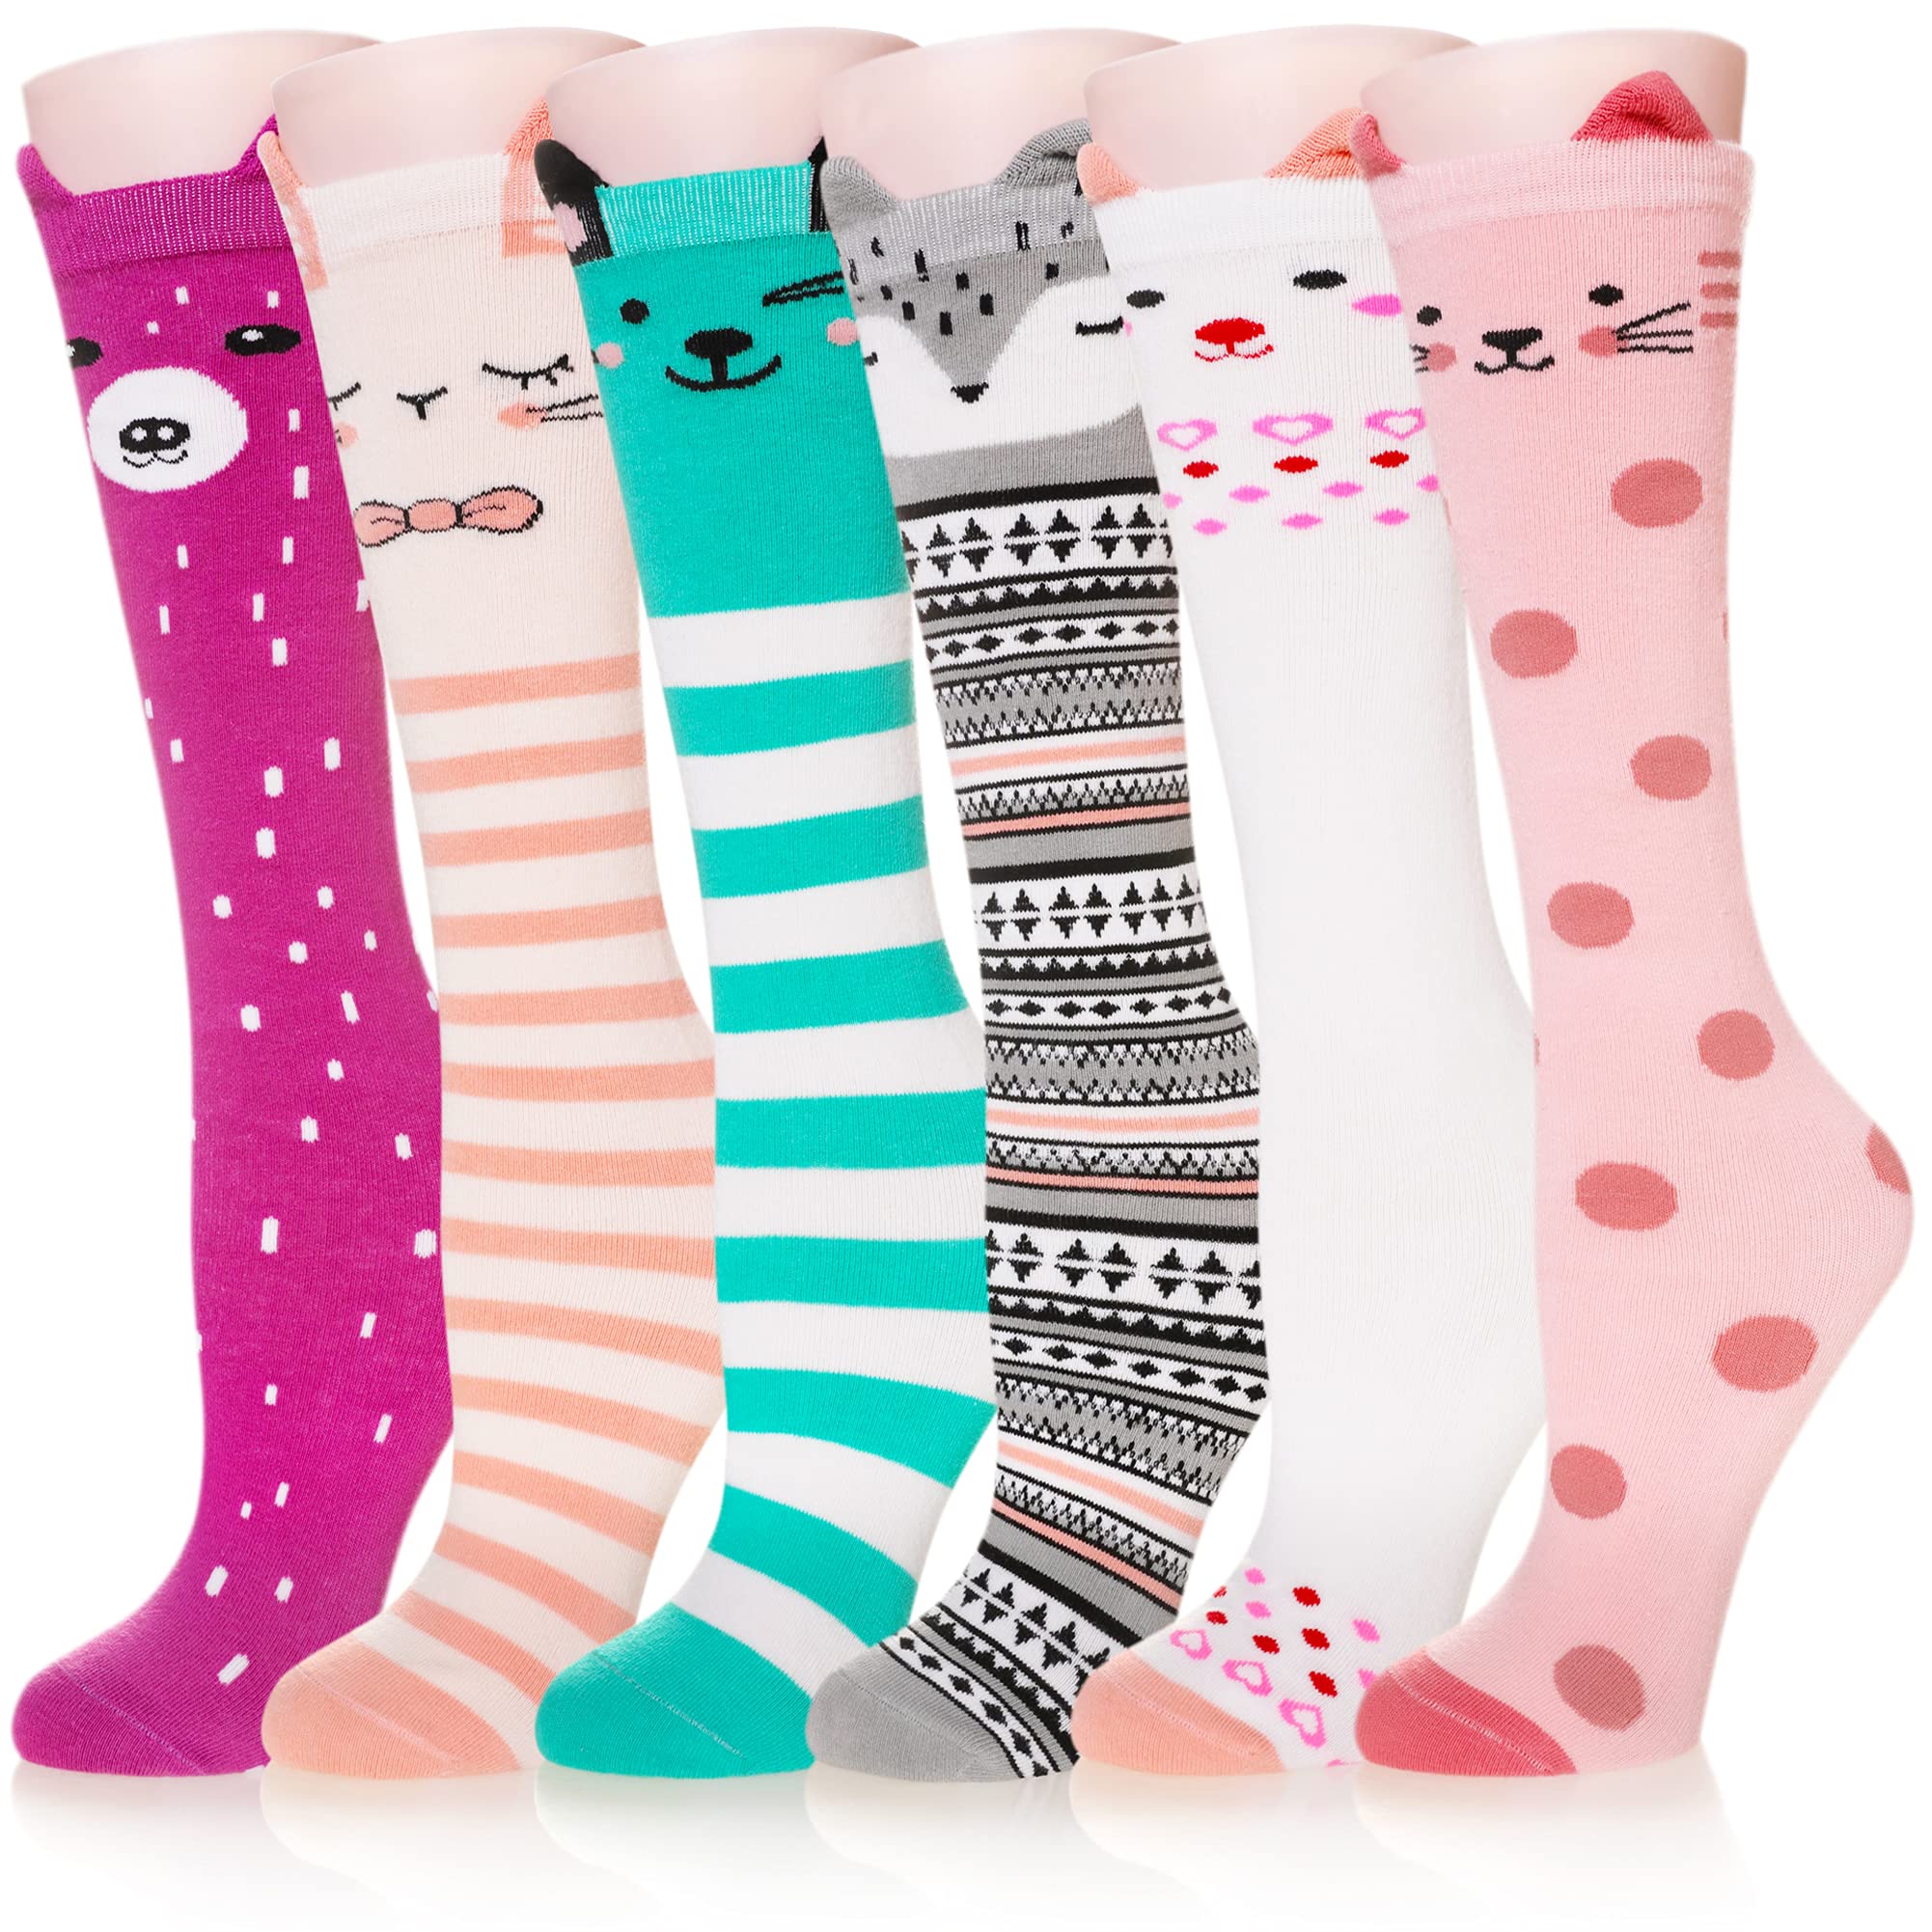 12 X GIRLS KNEE HIGH SOCKS LONG FUNNY BOOT KIDS CRAZY ANIMAL PATTERN TALL CUTE FUN CHILD SOCKS FOR GIRLS GIFTS 6 PAIRS (6 PAIRS STRIPE ANIMAL) - TOTAL RRP £150: LOCATION - RACK D